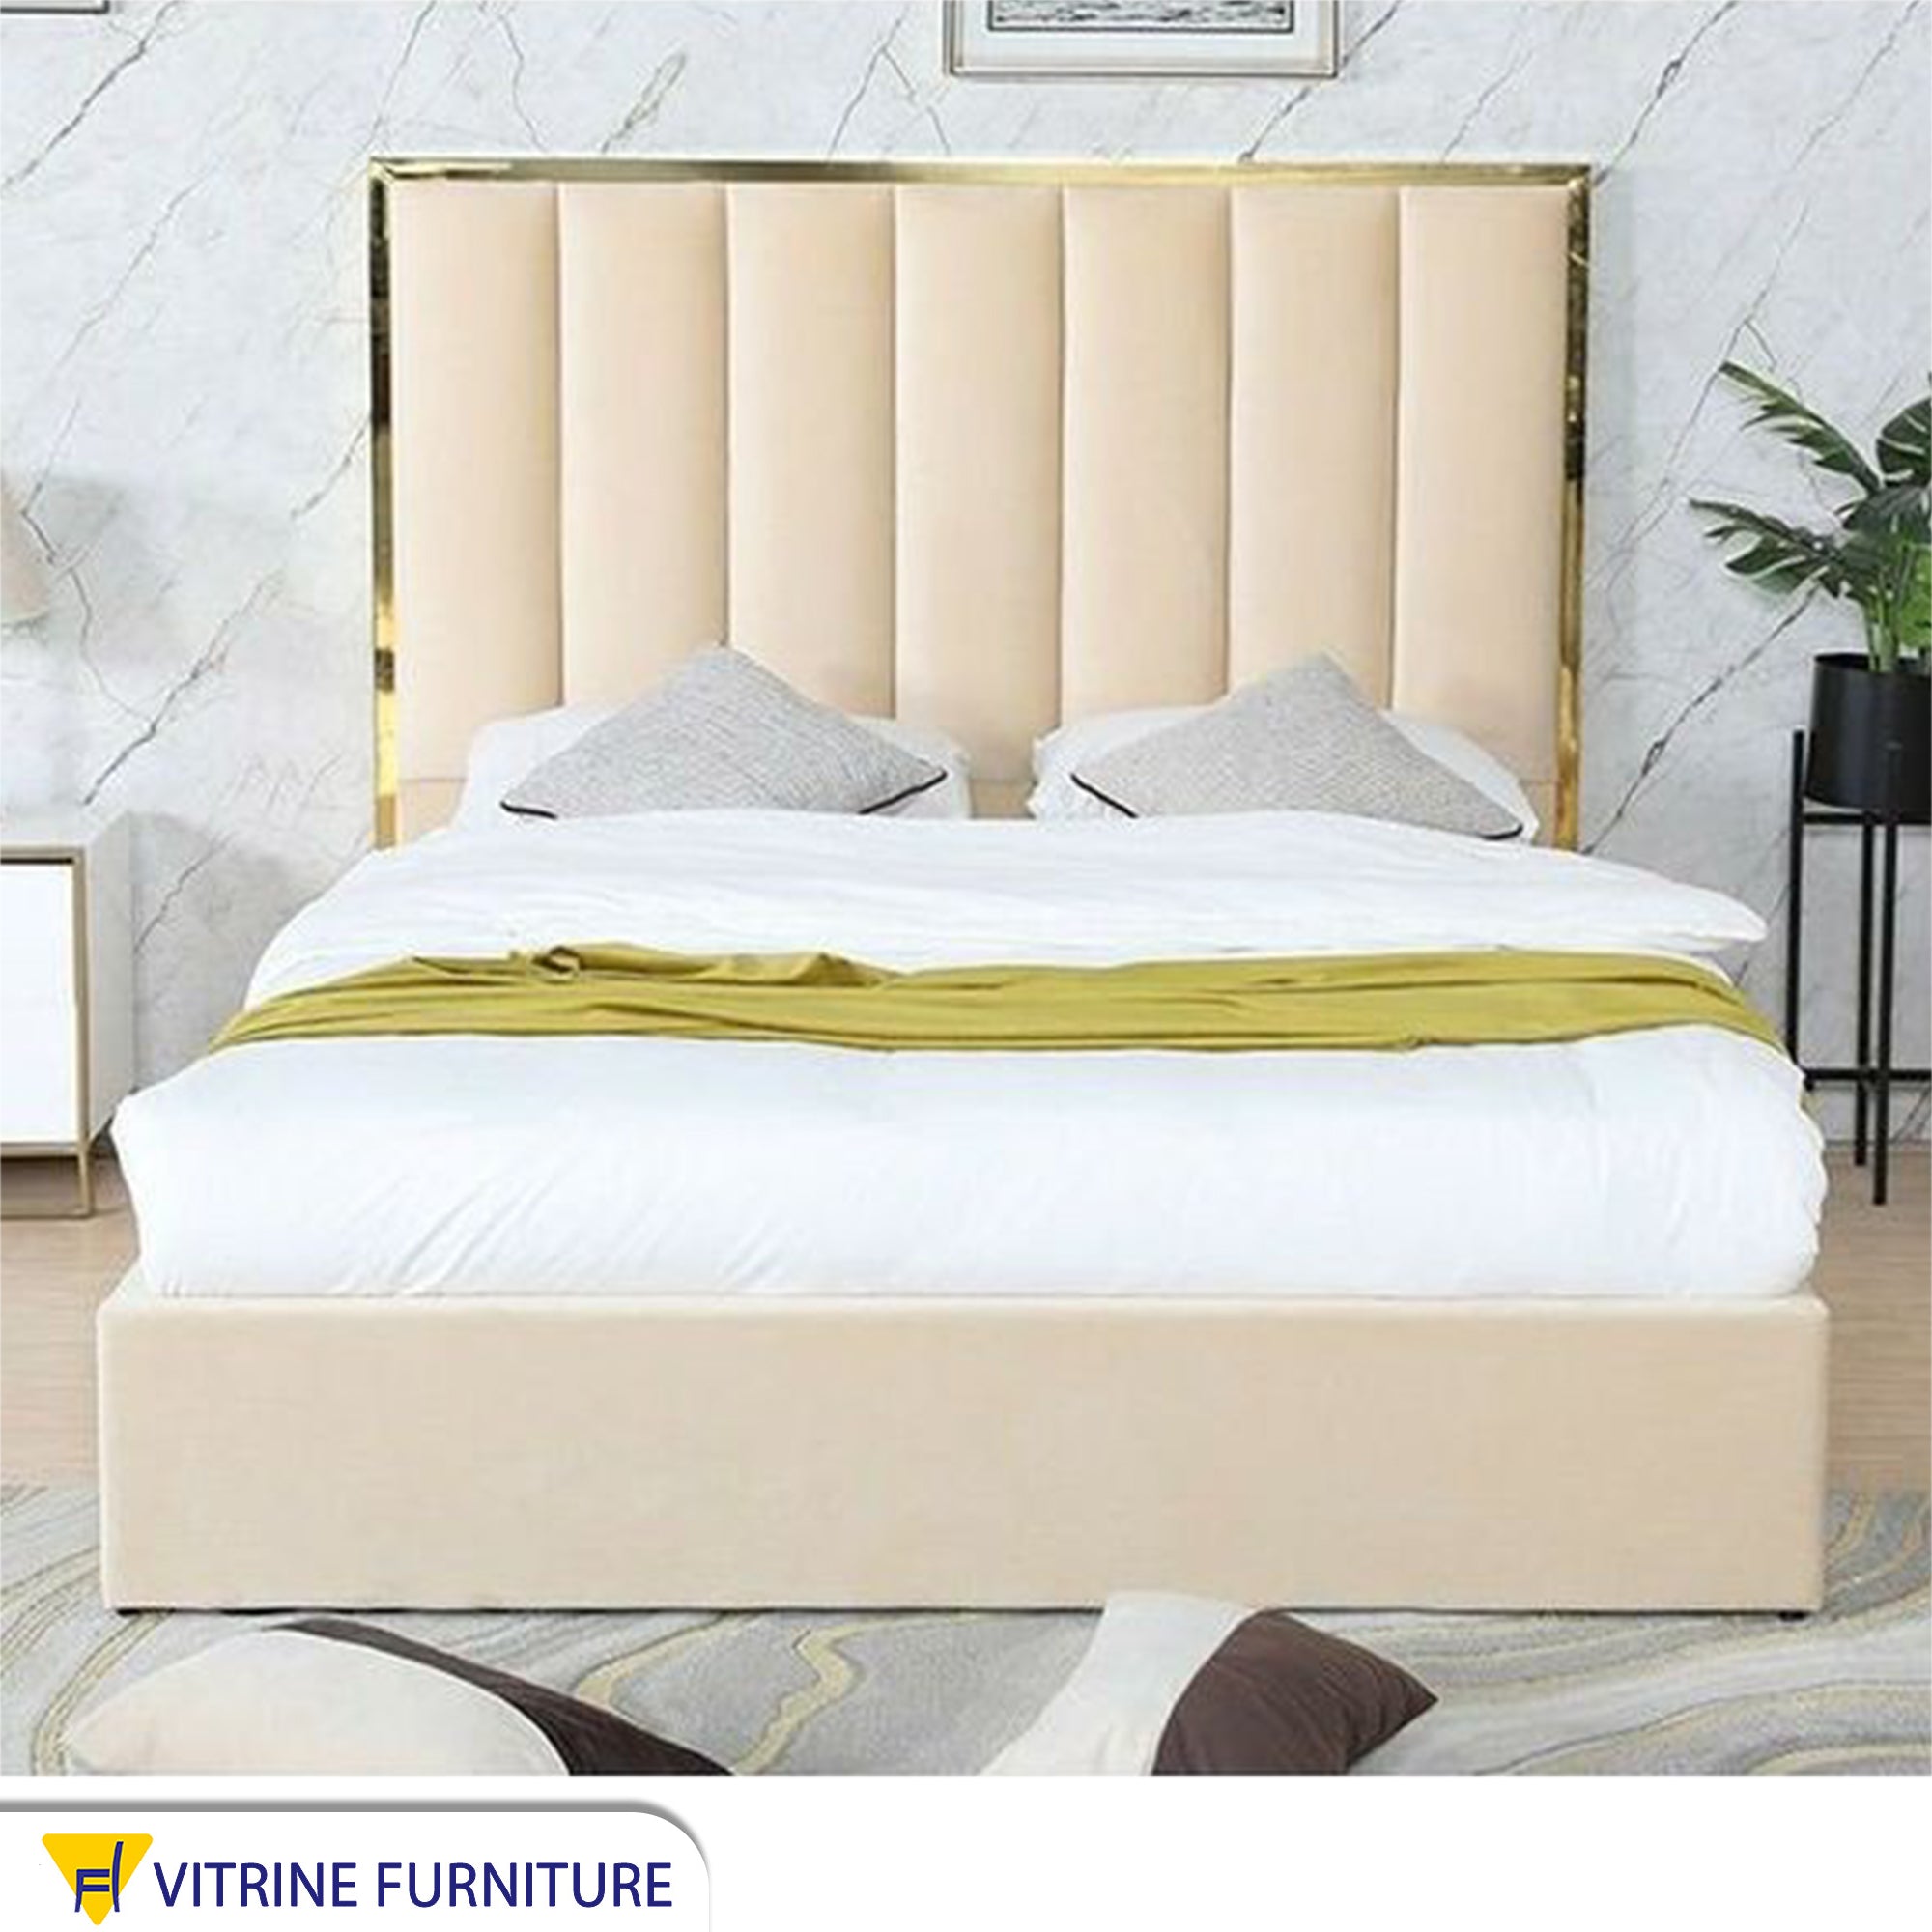 Single bed with gold steel ornaments